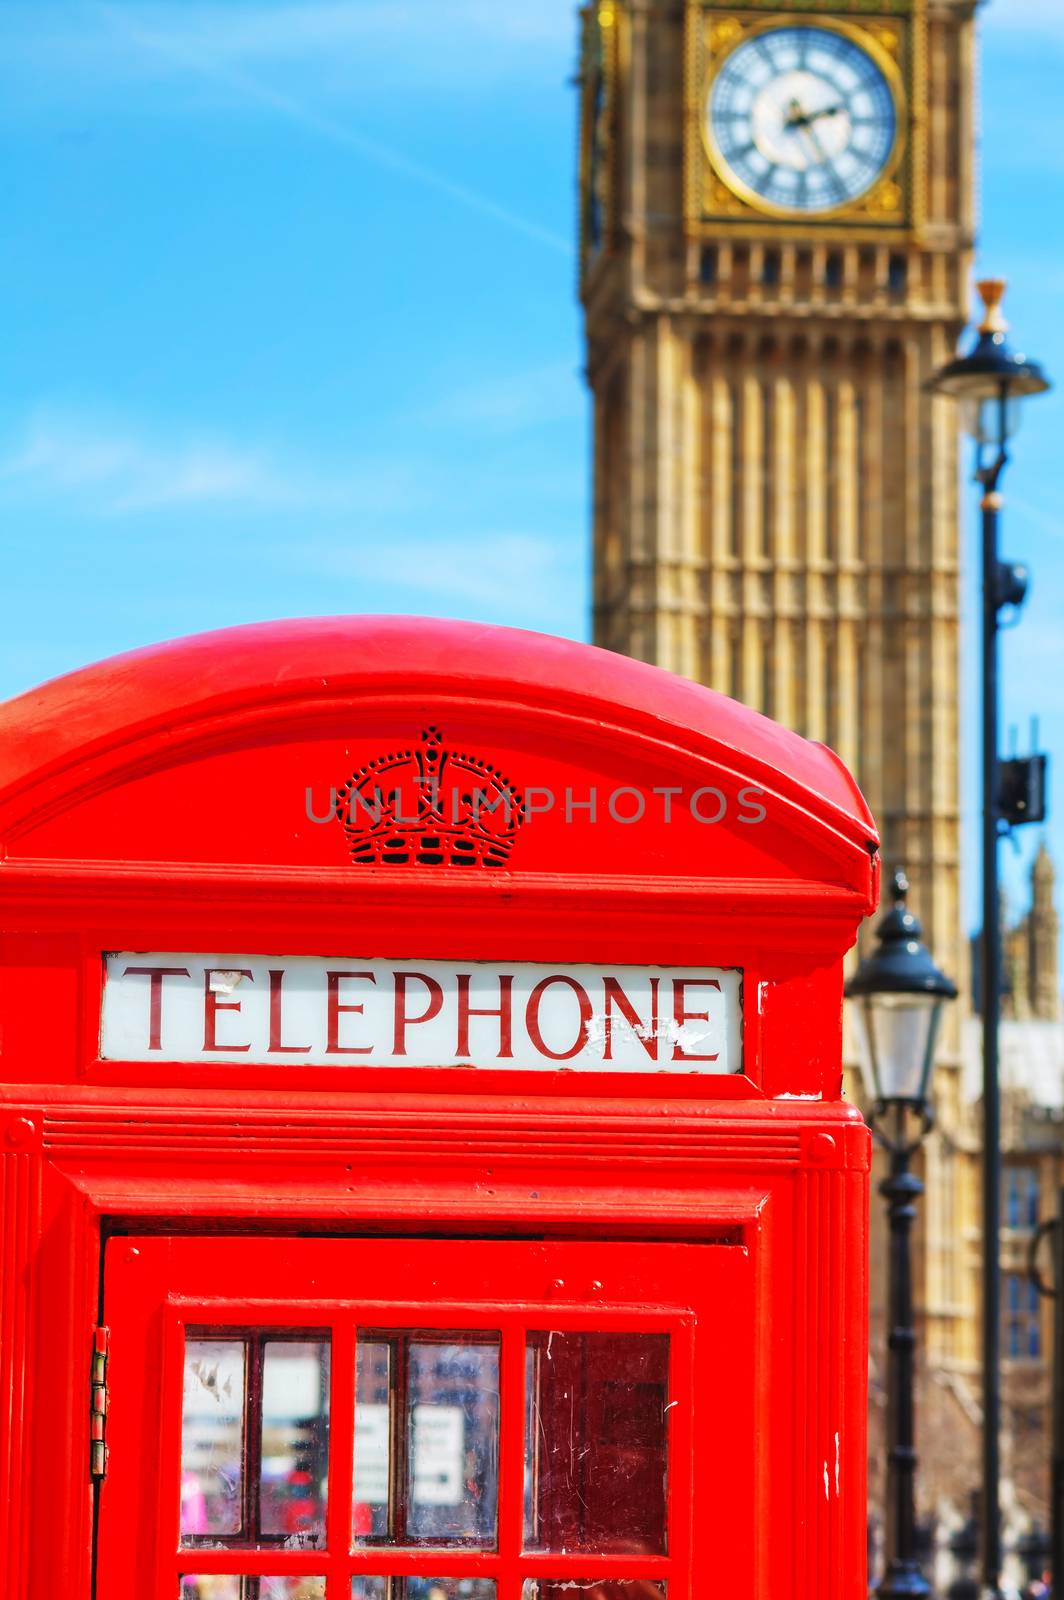 Famous red telephone booth in London, UK